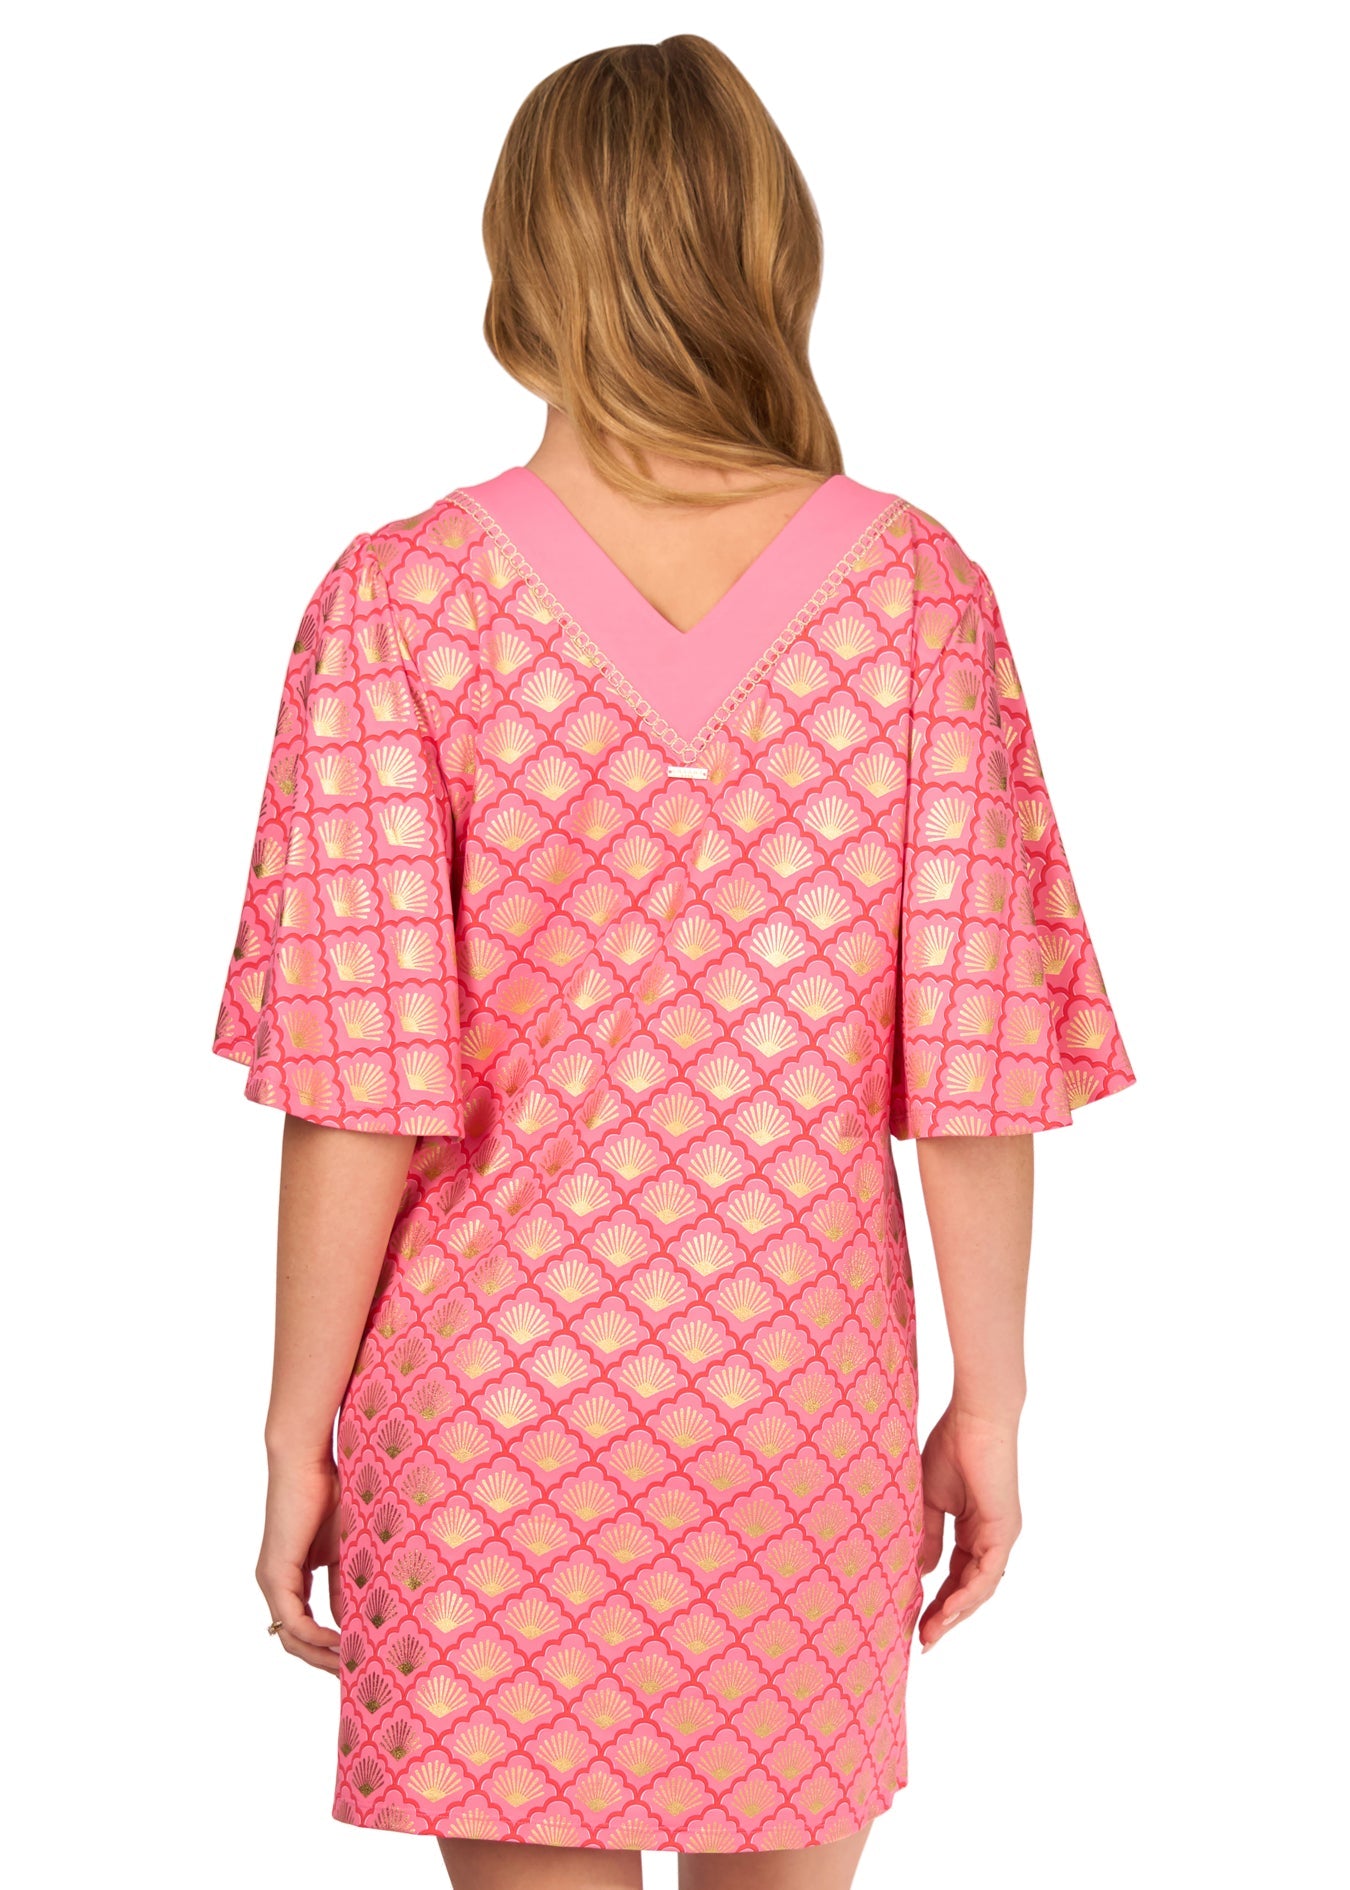 The back of a woman wearing the Coral Metallic Embroidered Flutter Sleeve Shift Dress on a white background.